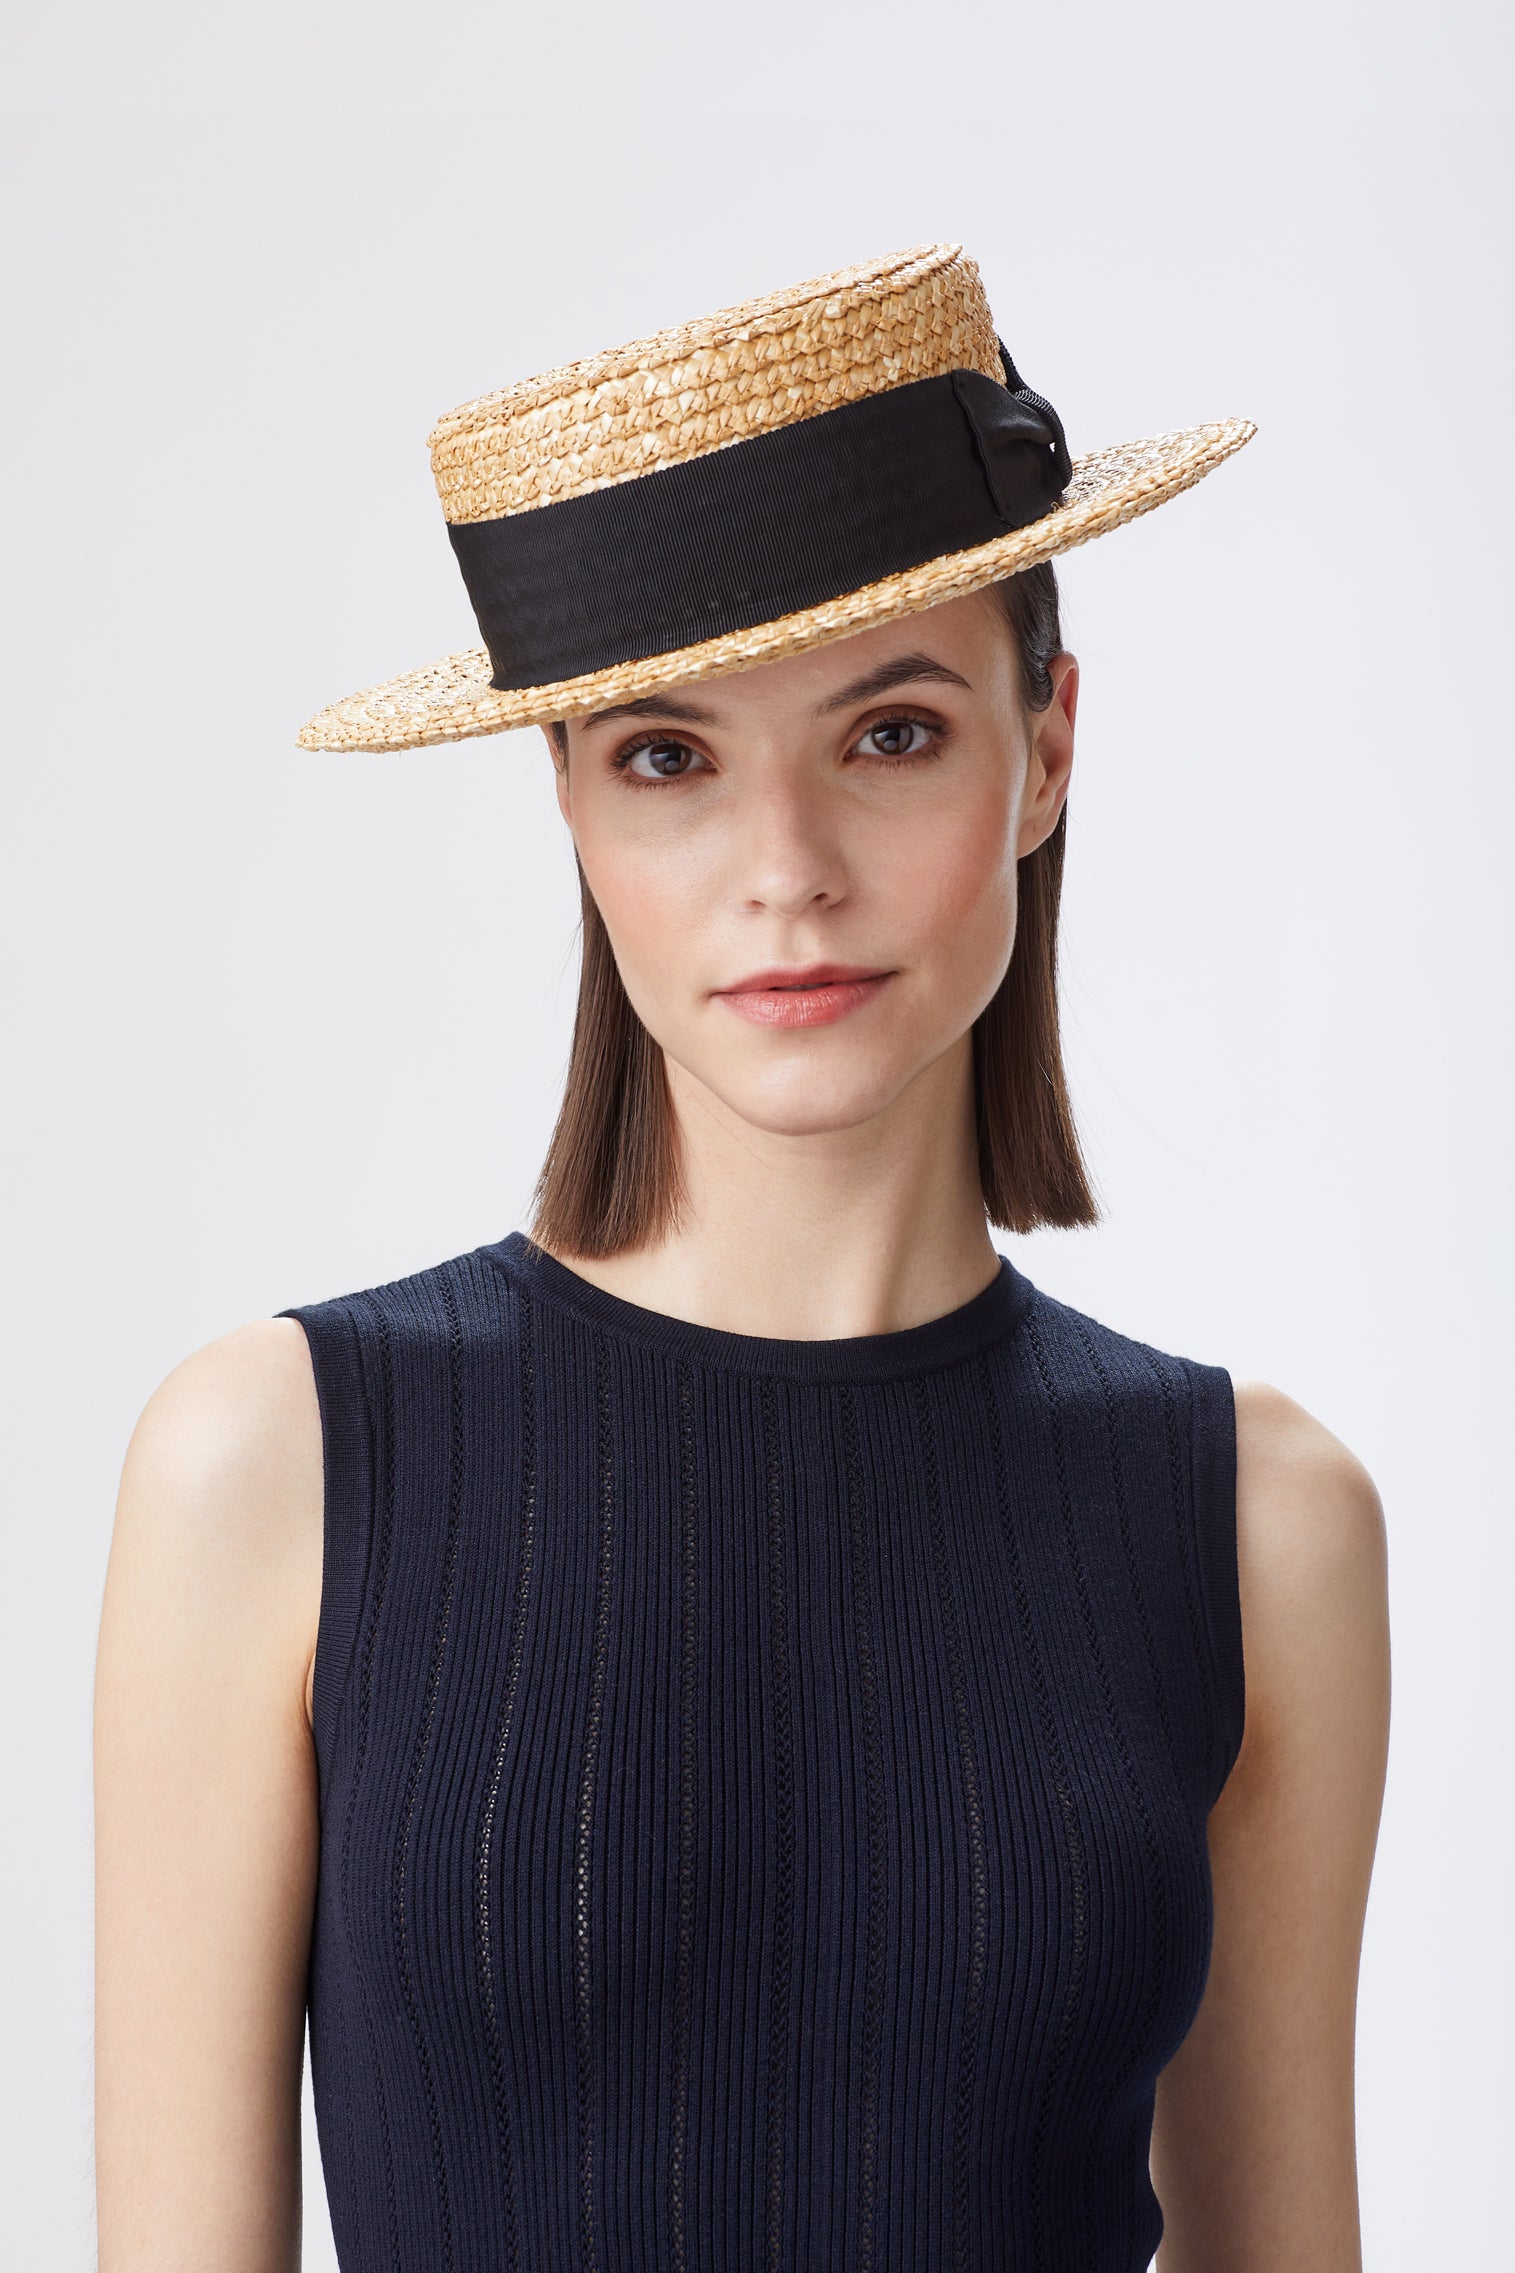 Classic Boater - Hats for Heart-shaped Face Shapes - Lock & Co. Hatters London UK